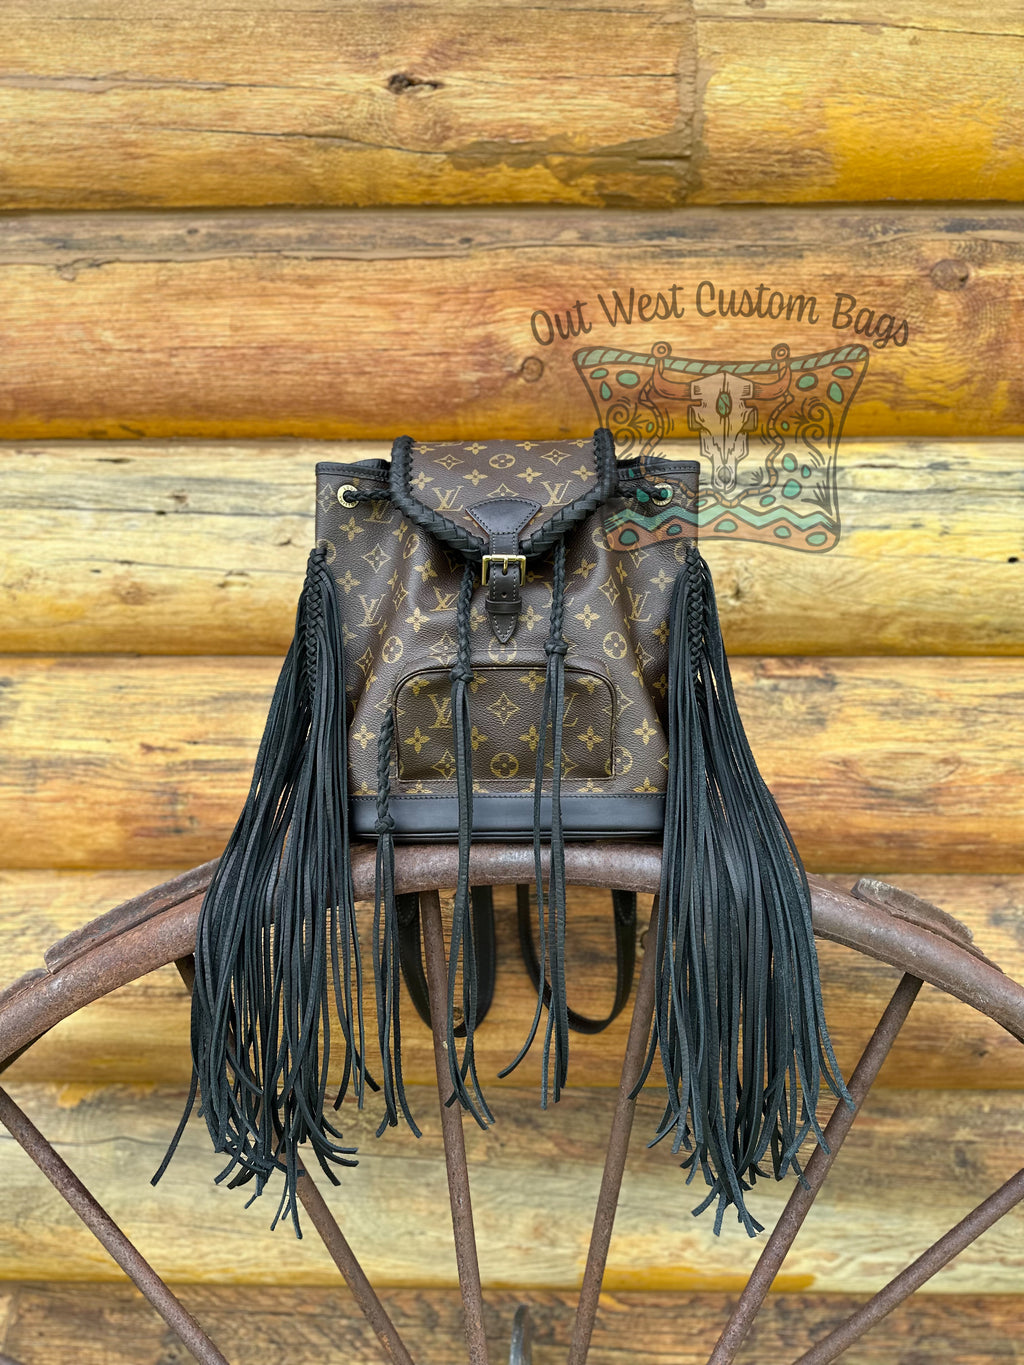 Out West St Cloud GM Fringeless Leather Revamp – Out West Custom Bags